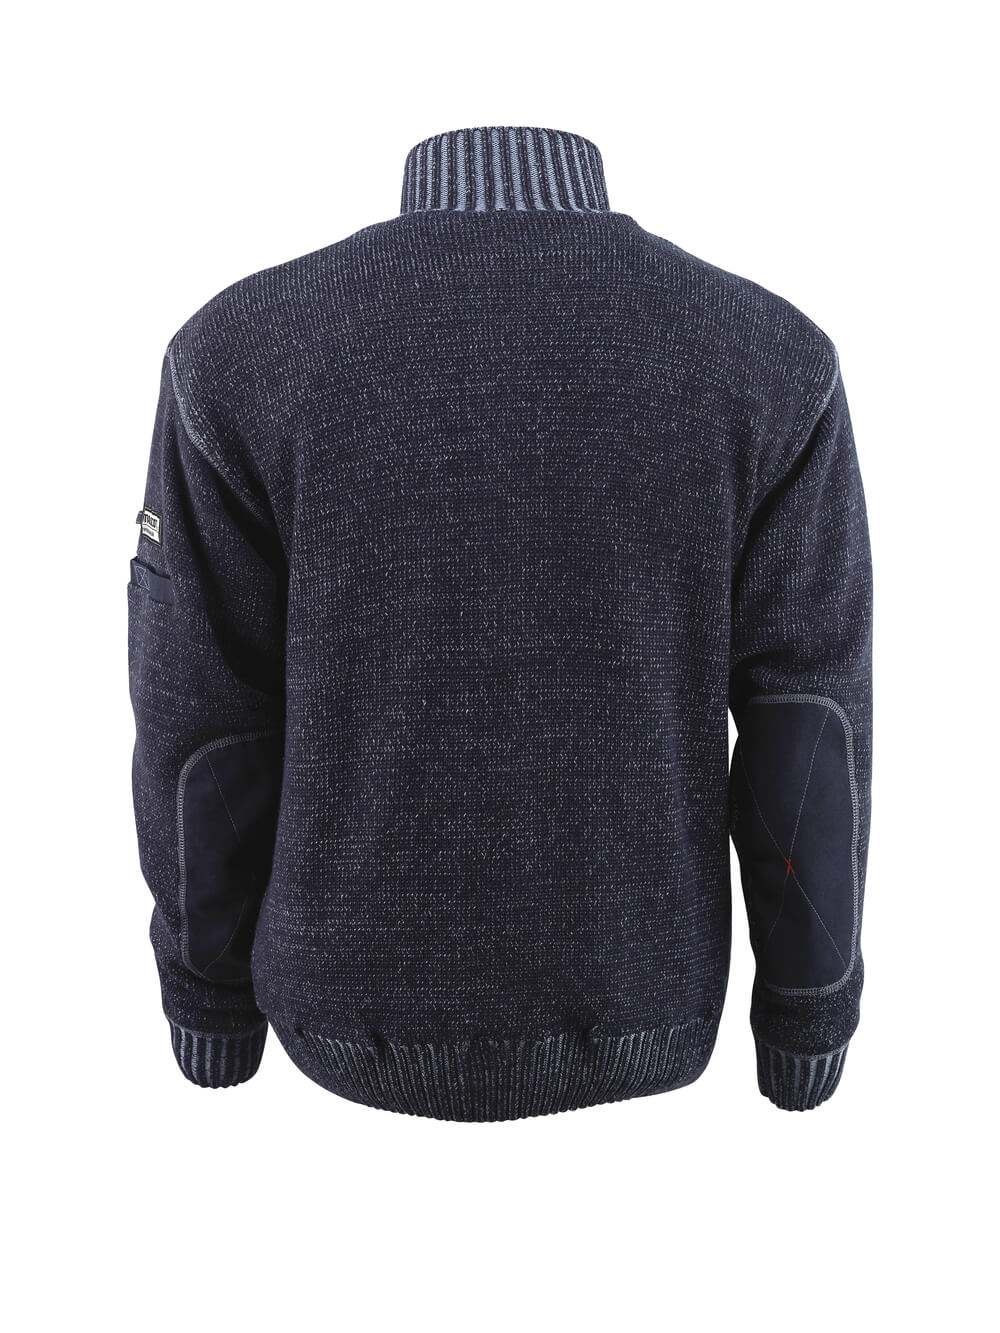 Mascot FRONTLINE  Naxos Knitted Jumper with half zip 50354 blue grey